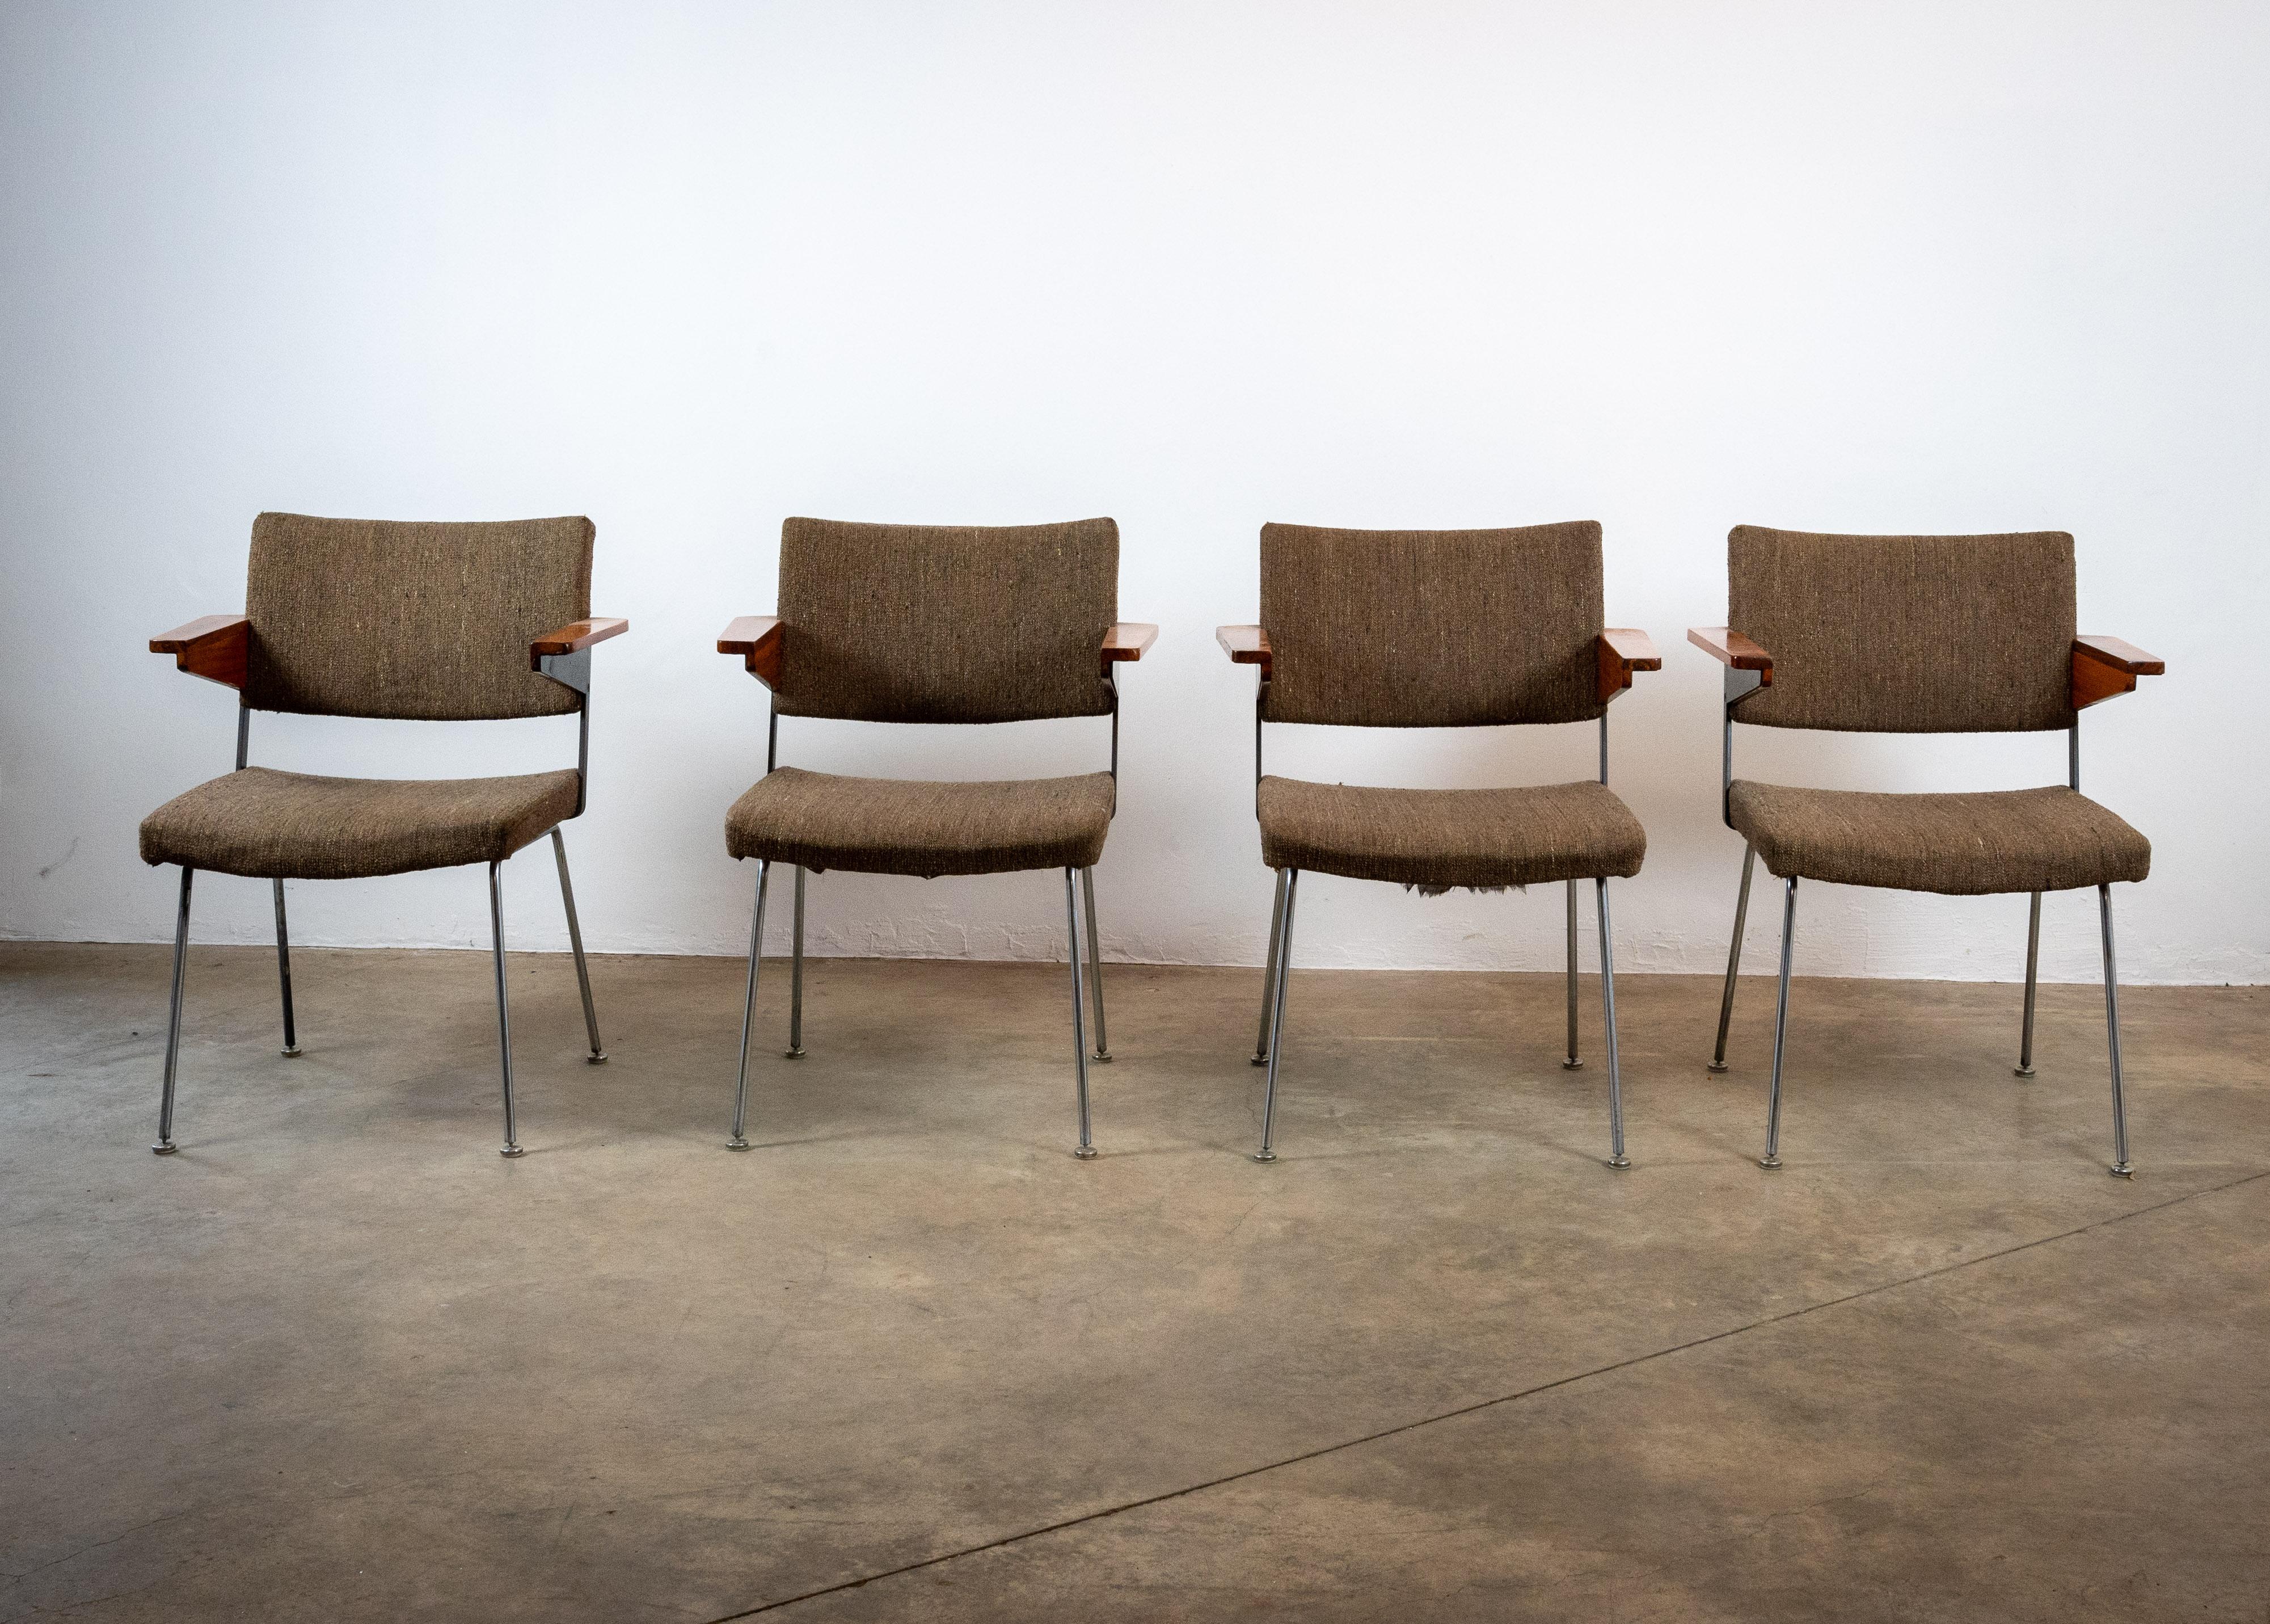 Presenting a set of 8 exquisite Gispen No.11 chairs, available for purchase as a set of 4 or 8. These mid-century marvels, designed by A.R. Cordemeyer, exude timeless elegance. Distinguished by their well-crafted wooden armrests, these chairs boast